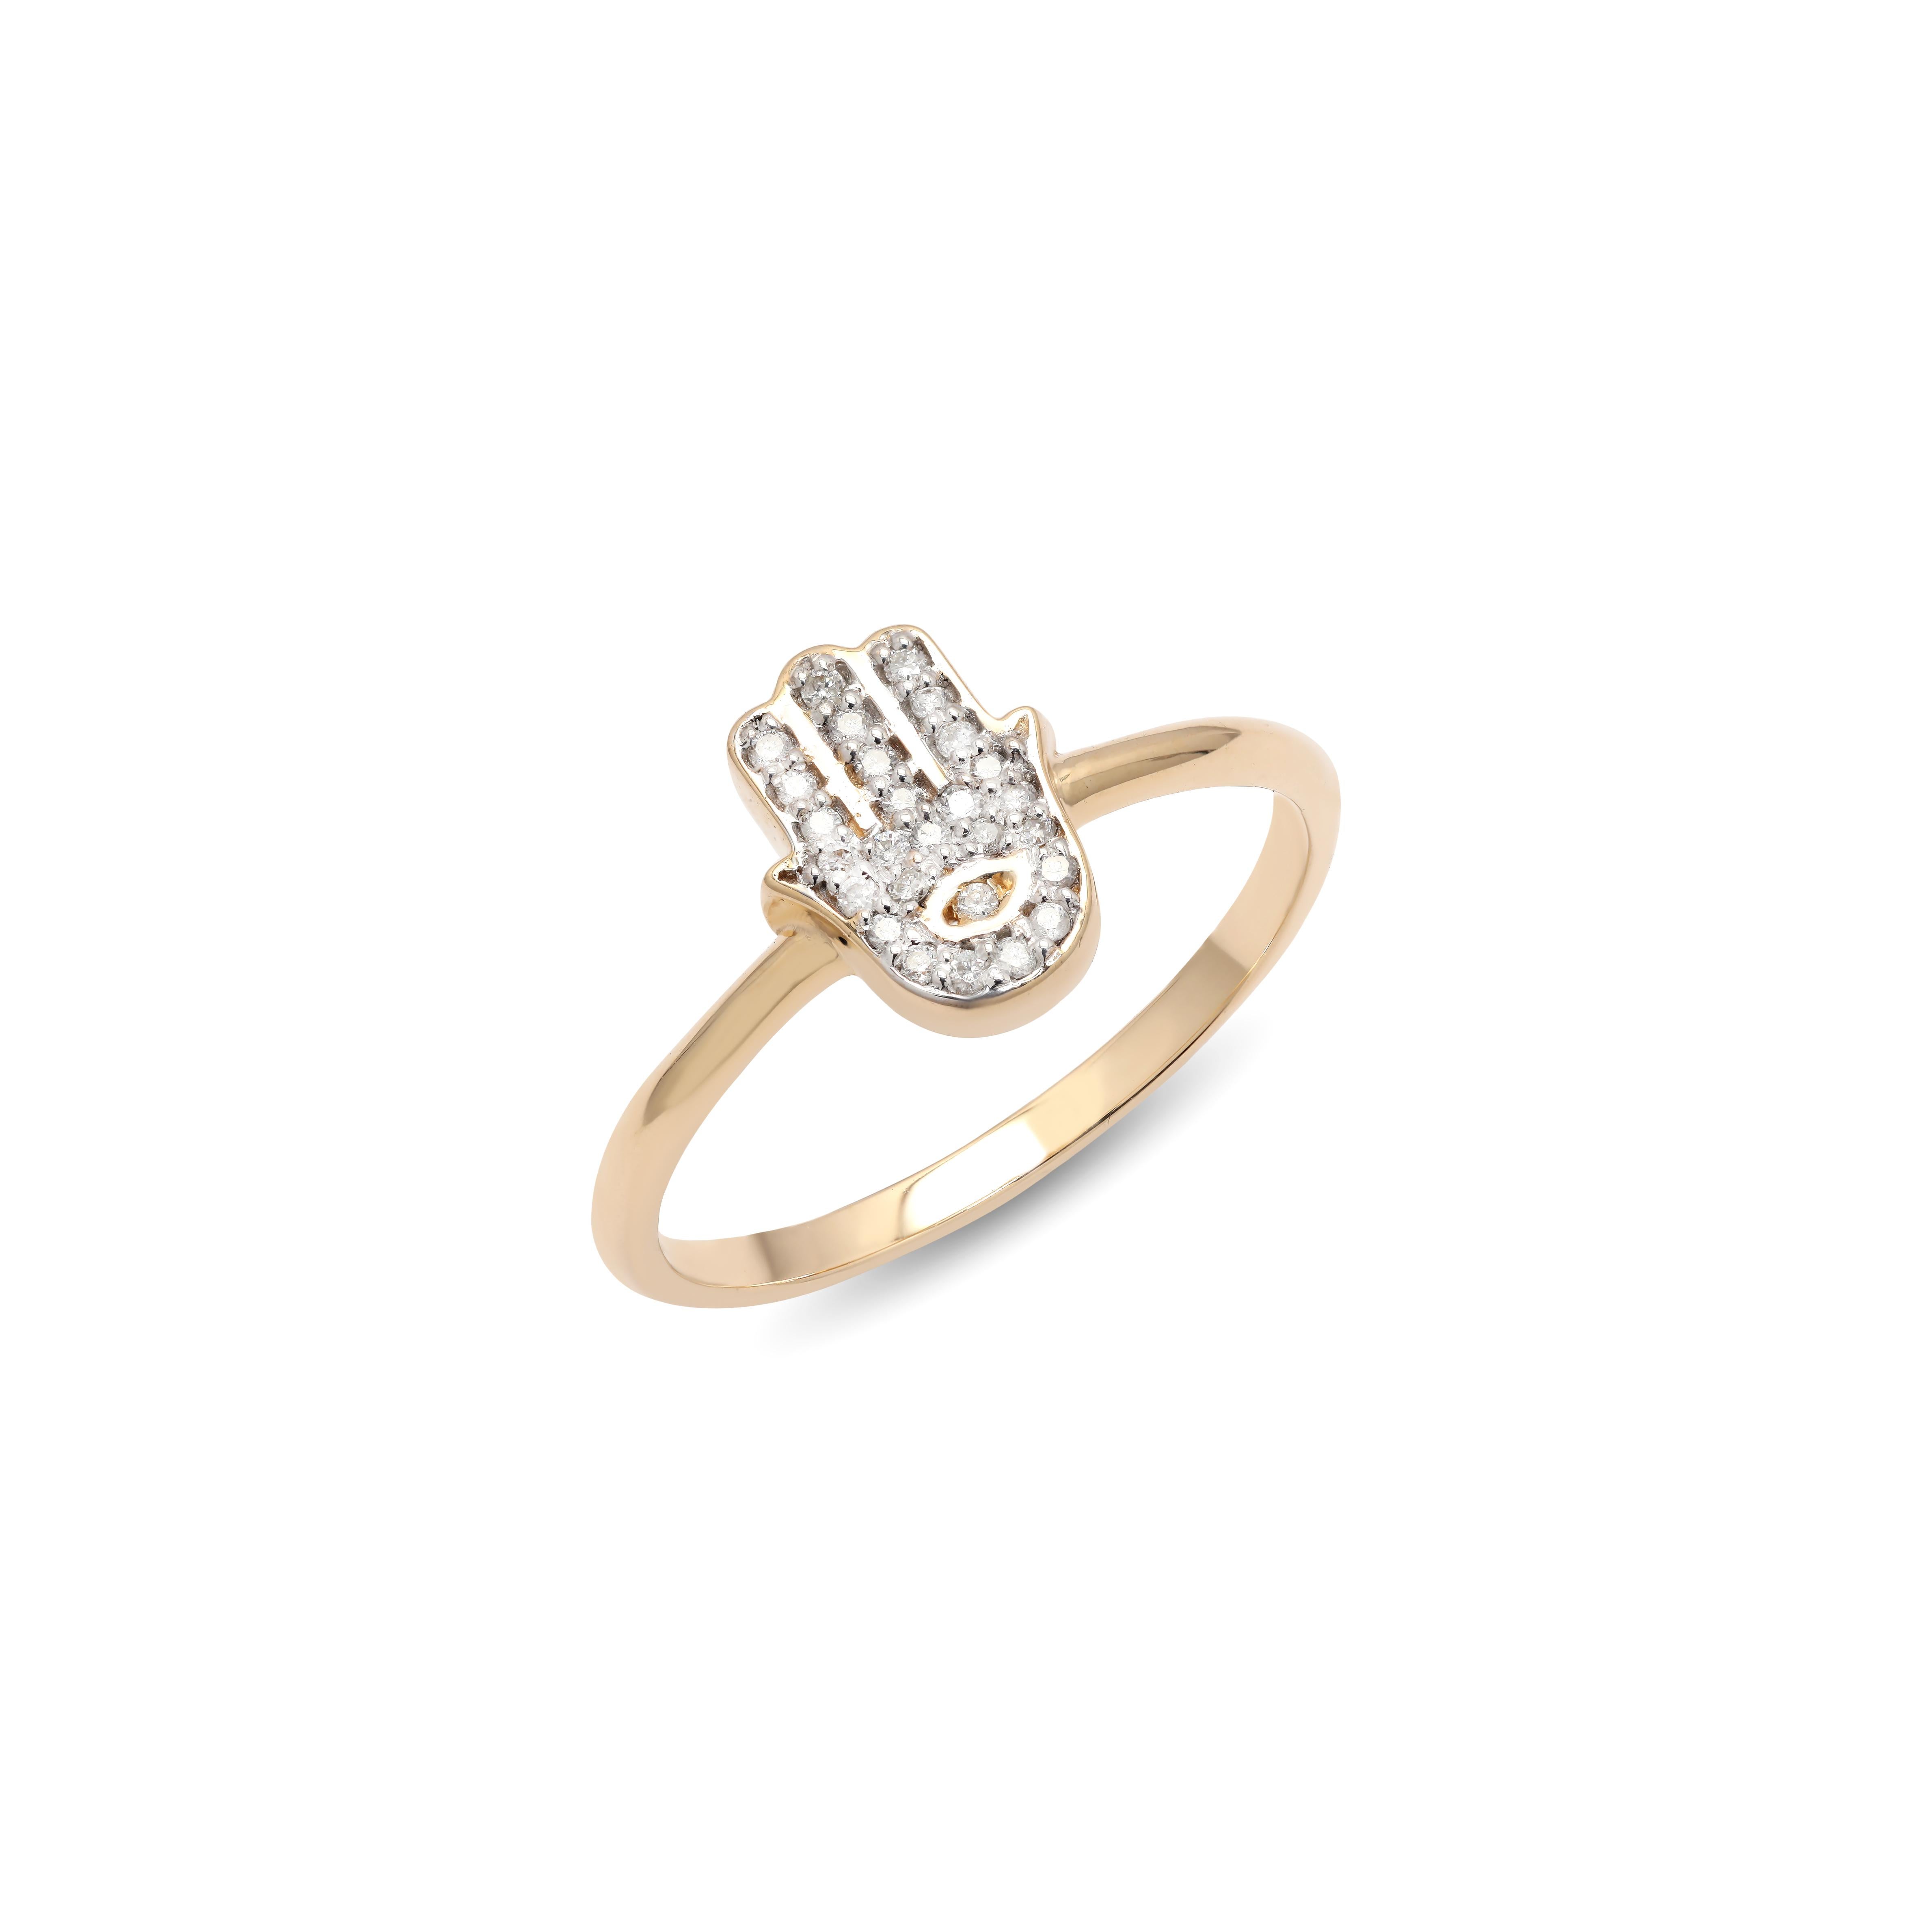 For Sale:  Dainty Hamsa Hand Diamond Ring in 14K Solid Yellow Gold 5